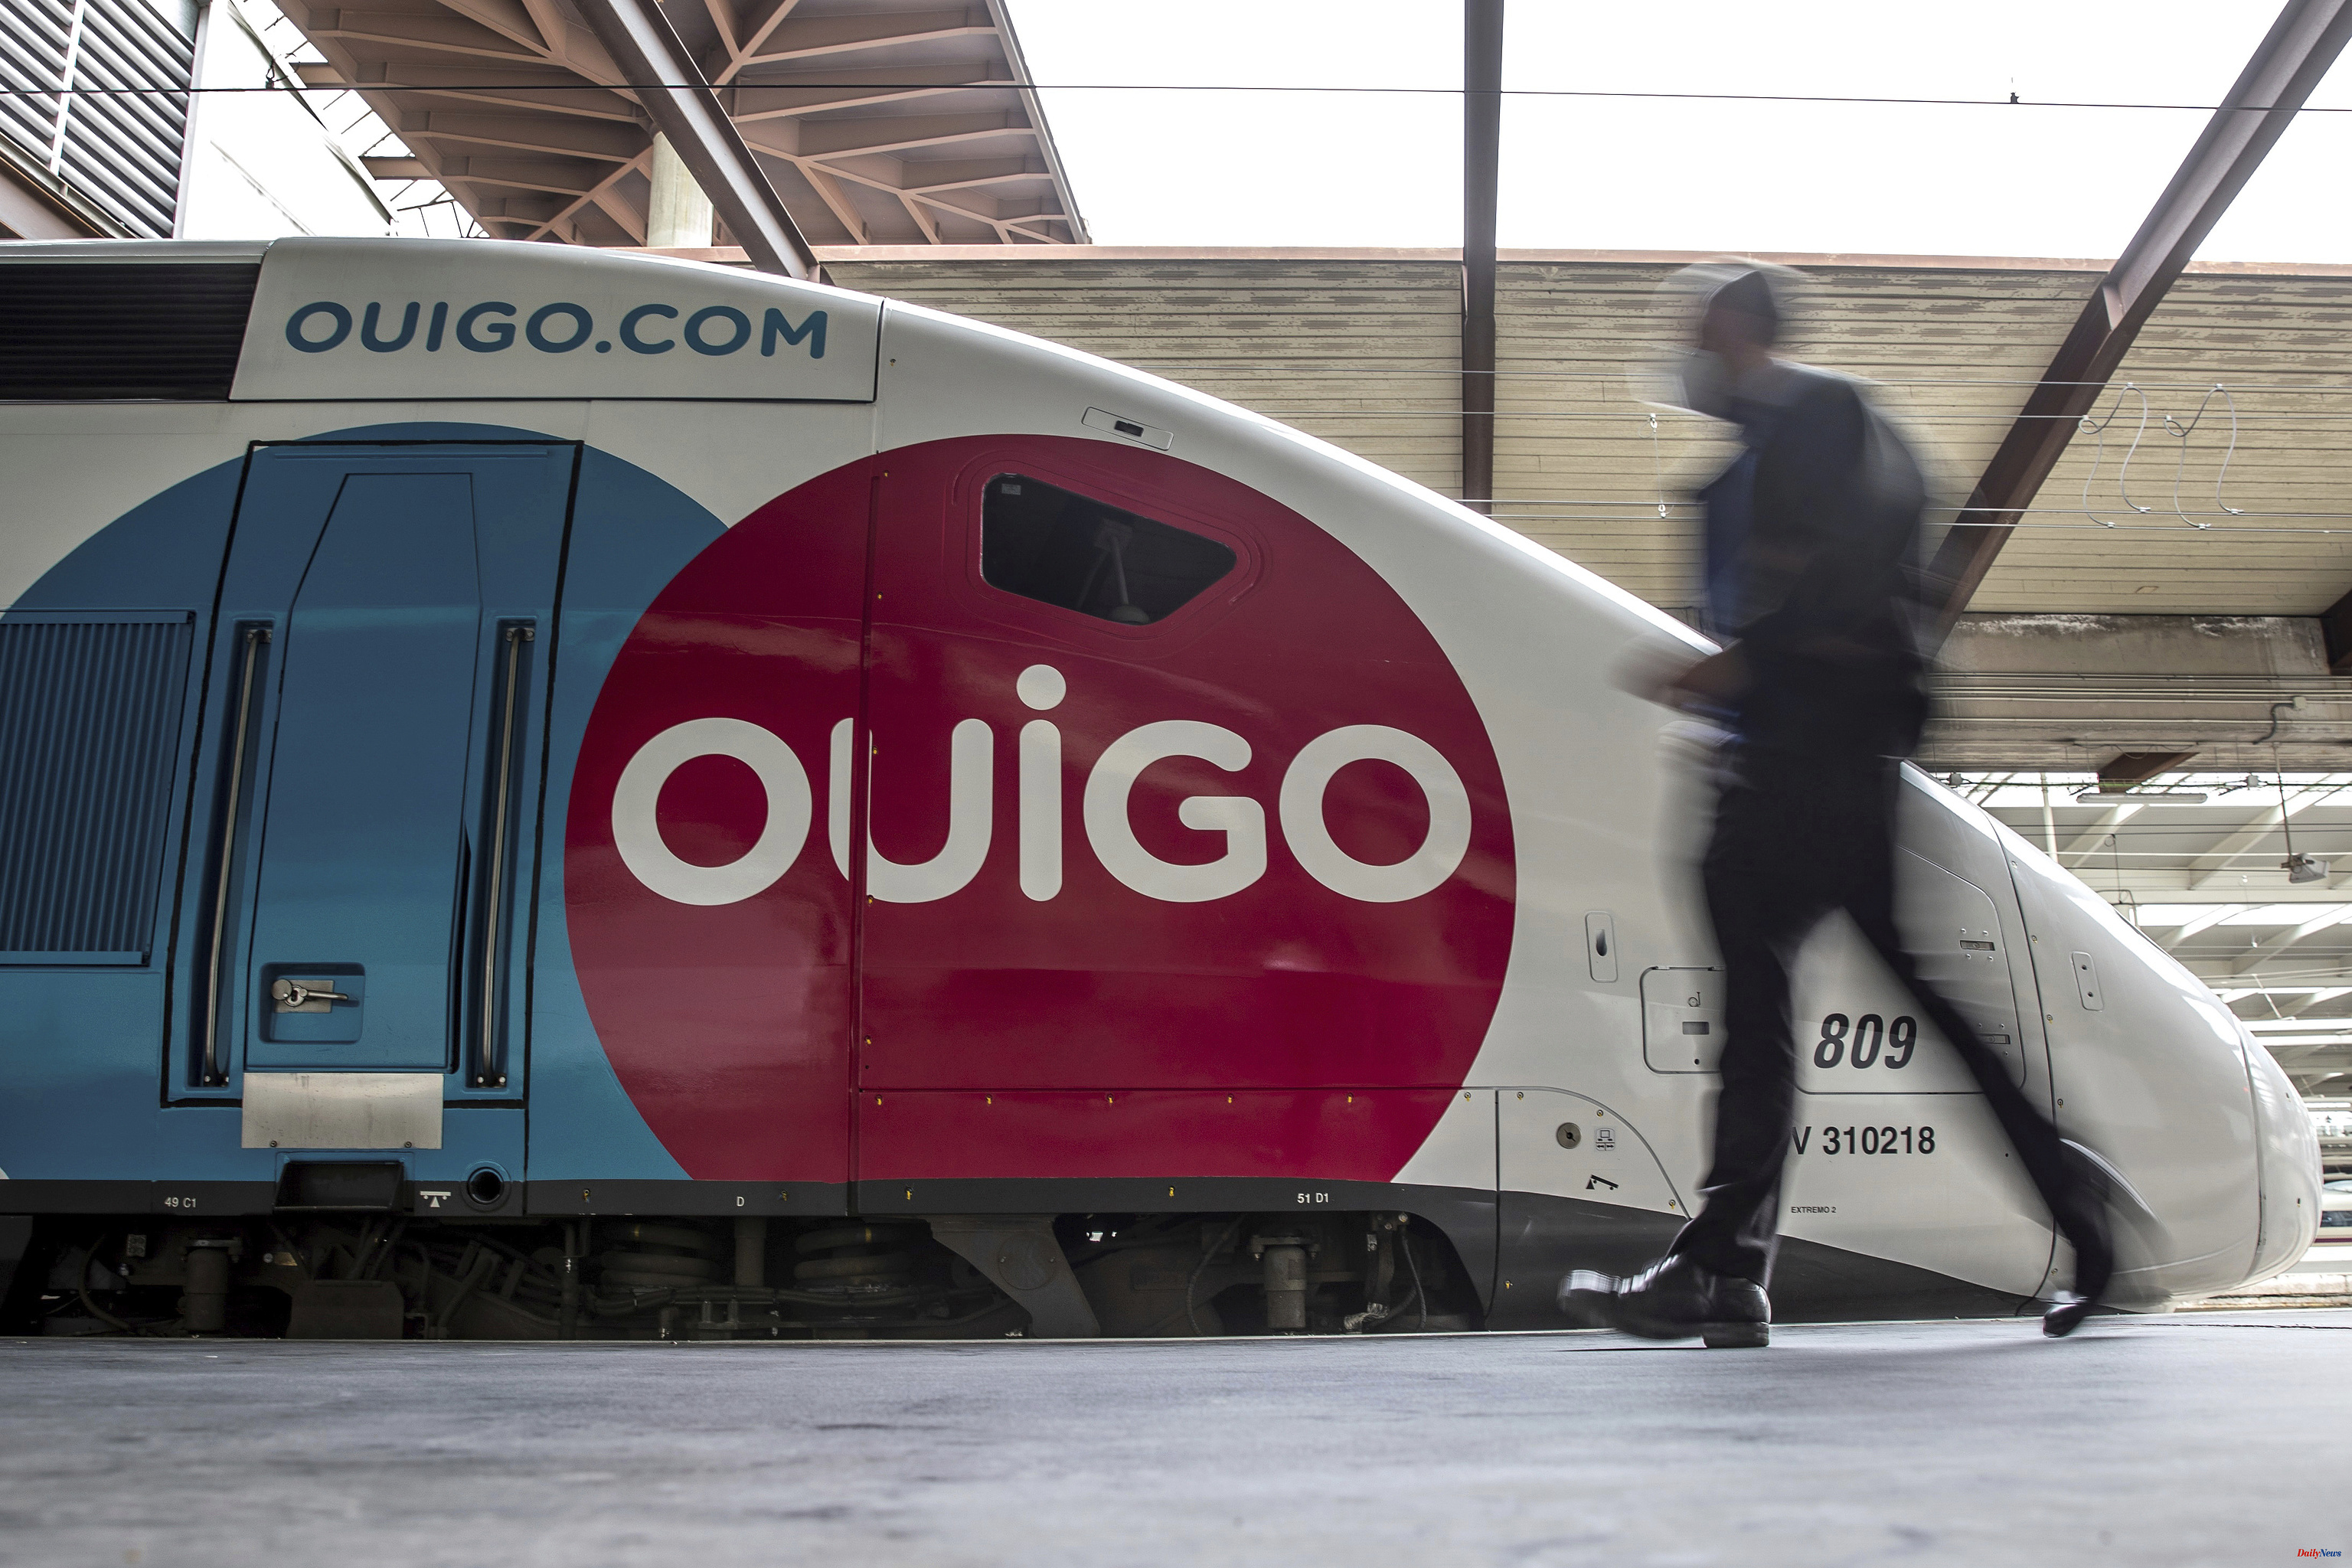 Transporte Ouigo launches this Thursday its high-speed line between Madrid, Albacete and Alicante